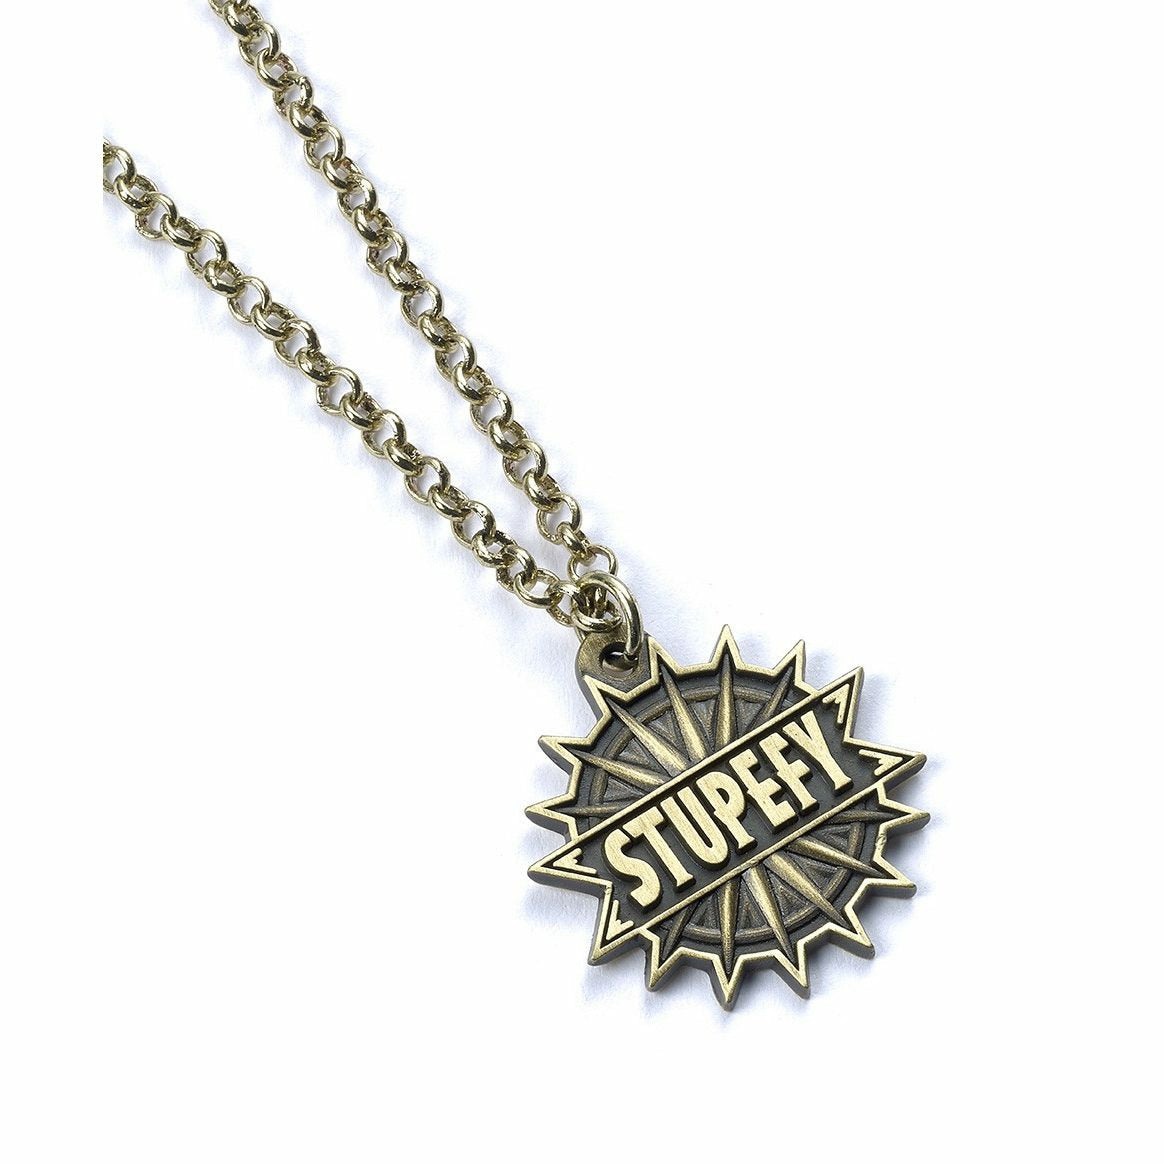 Fantastic Beasts and Where to Find Them Stupefy Necklace